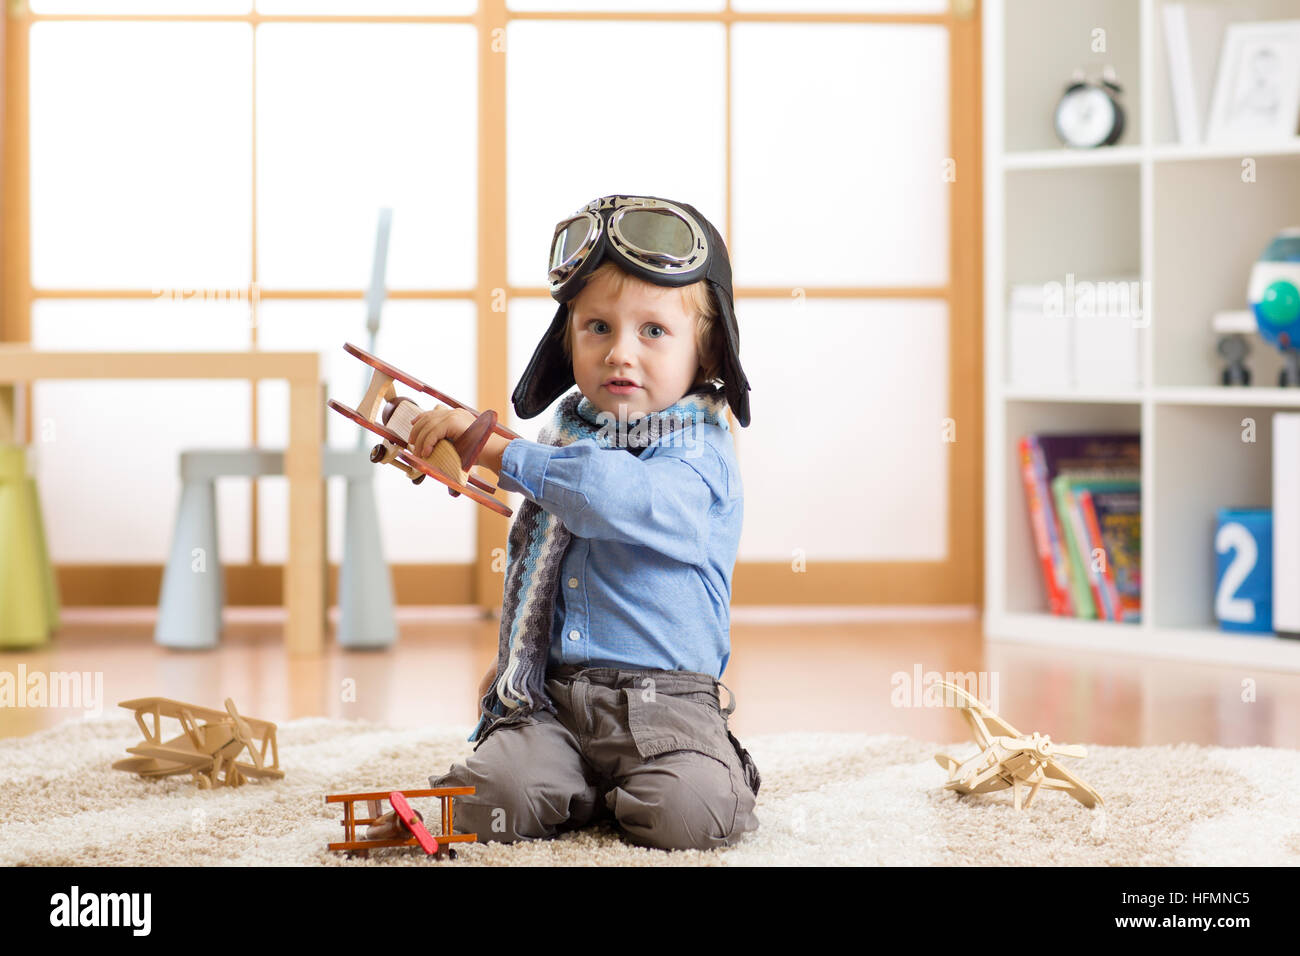 Cute baby dreaming of being pilot. Child boy playing with toy airplanes Stock Photo